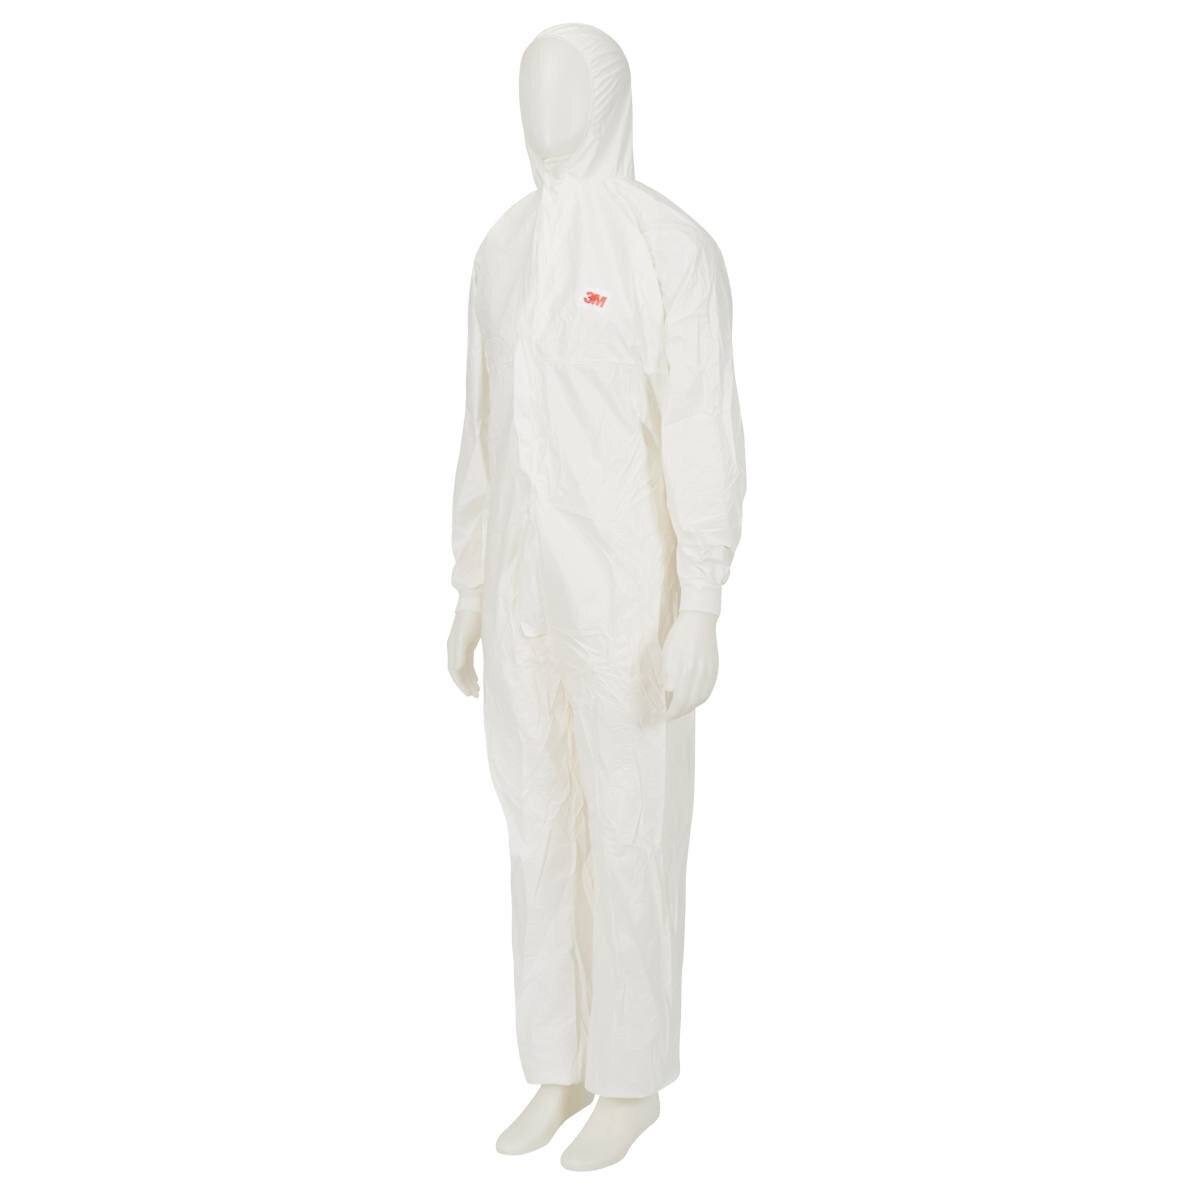 3M 4540+ coverall, white+blue, type 5/6, size 4XL, robust, lint-free, reinforced seams, SMMMS material, breathable, detachable zipper, knitted cuffs